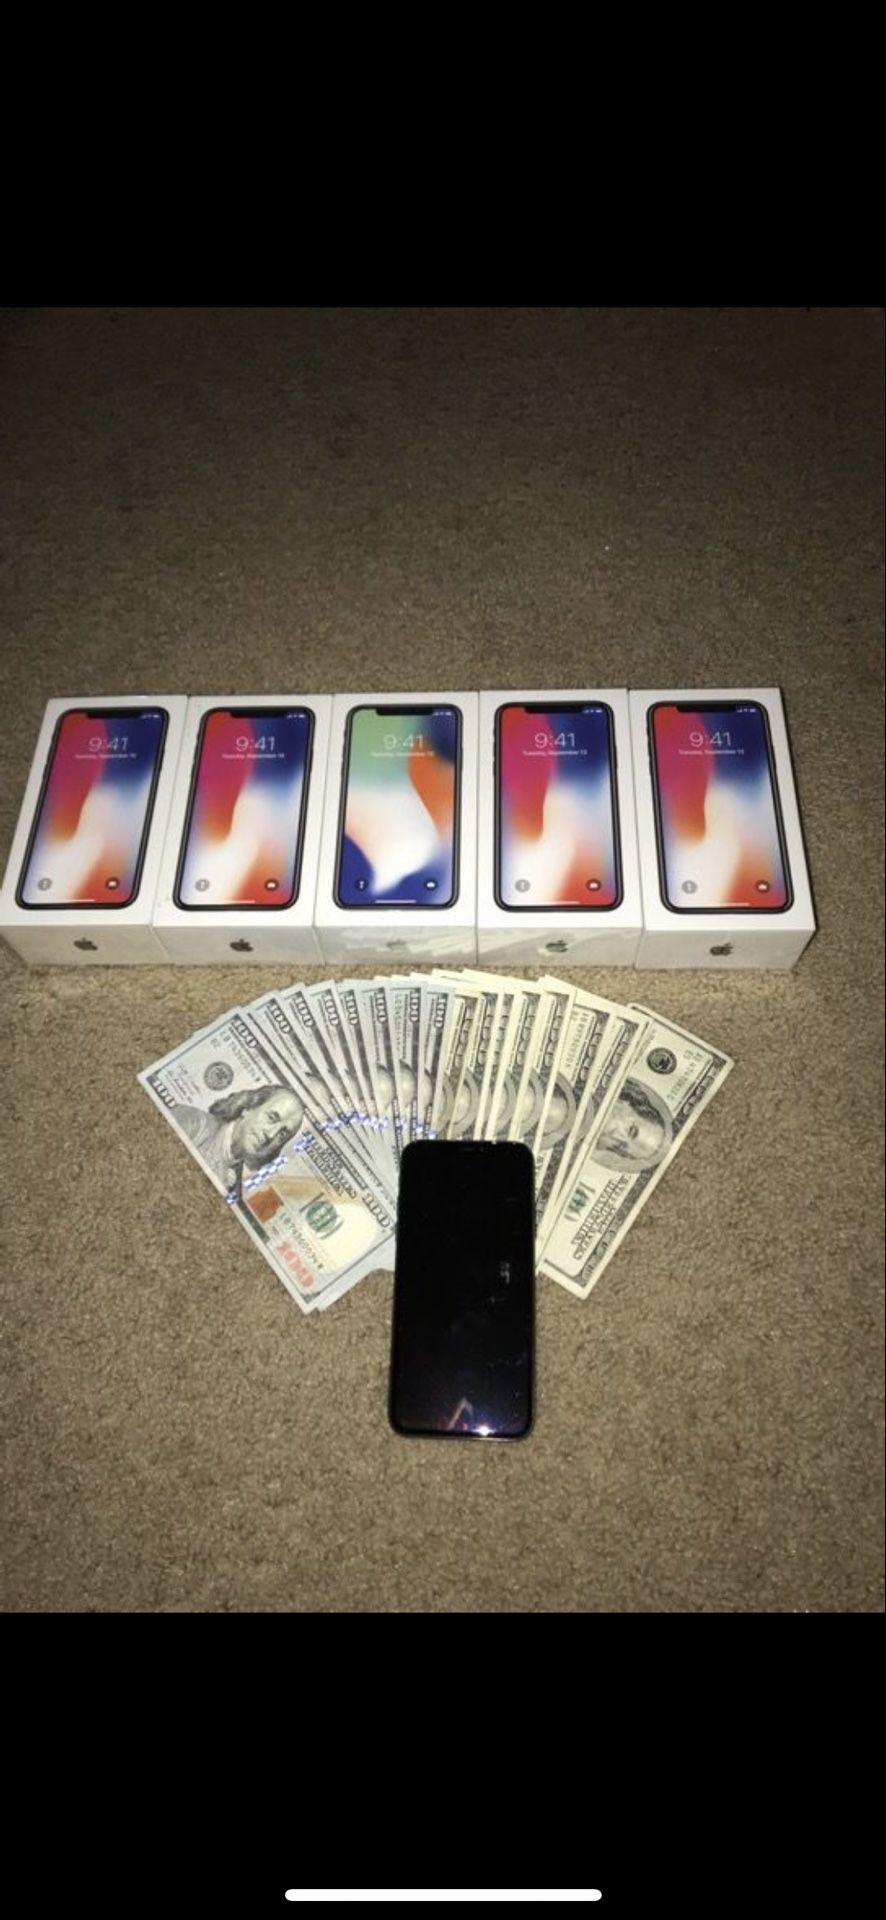 I pay top $$ for iPhones and Apple Devices